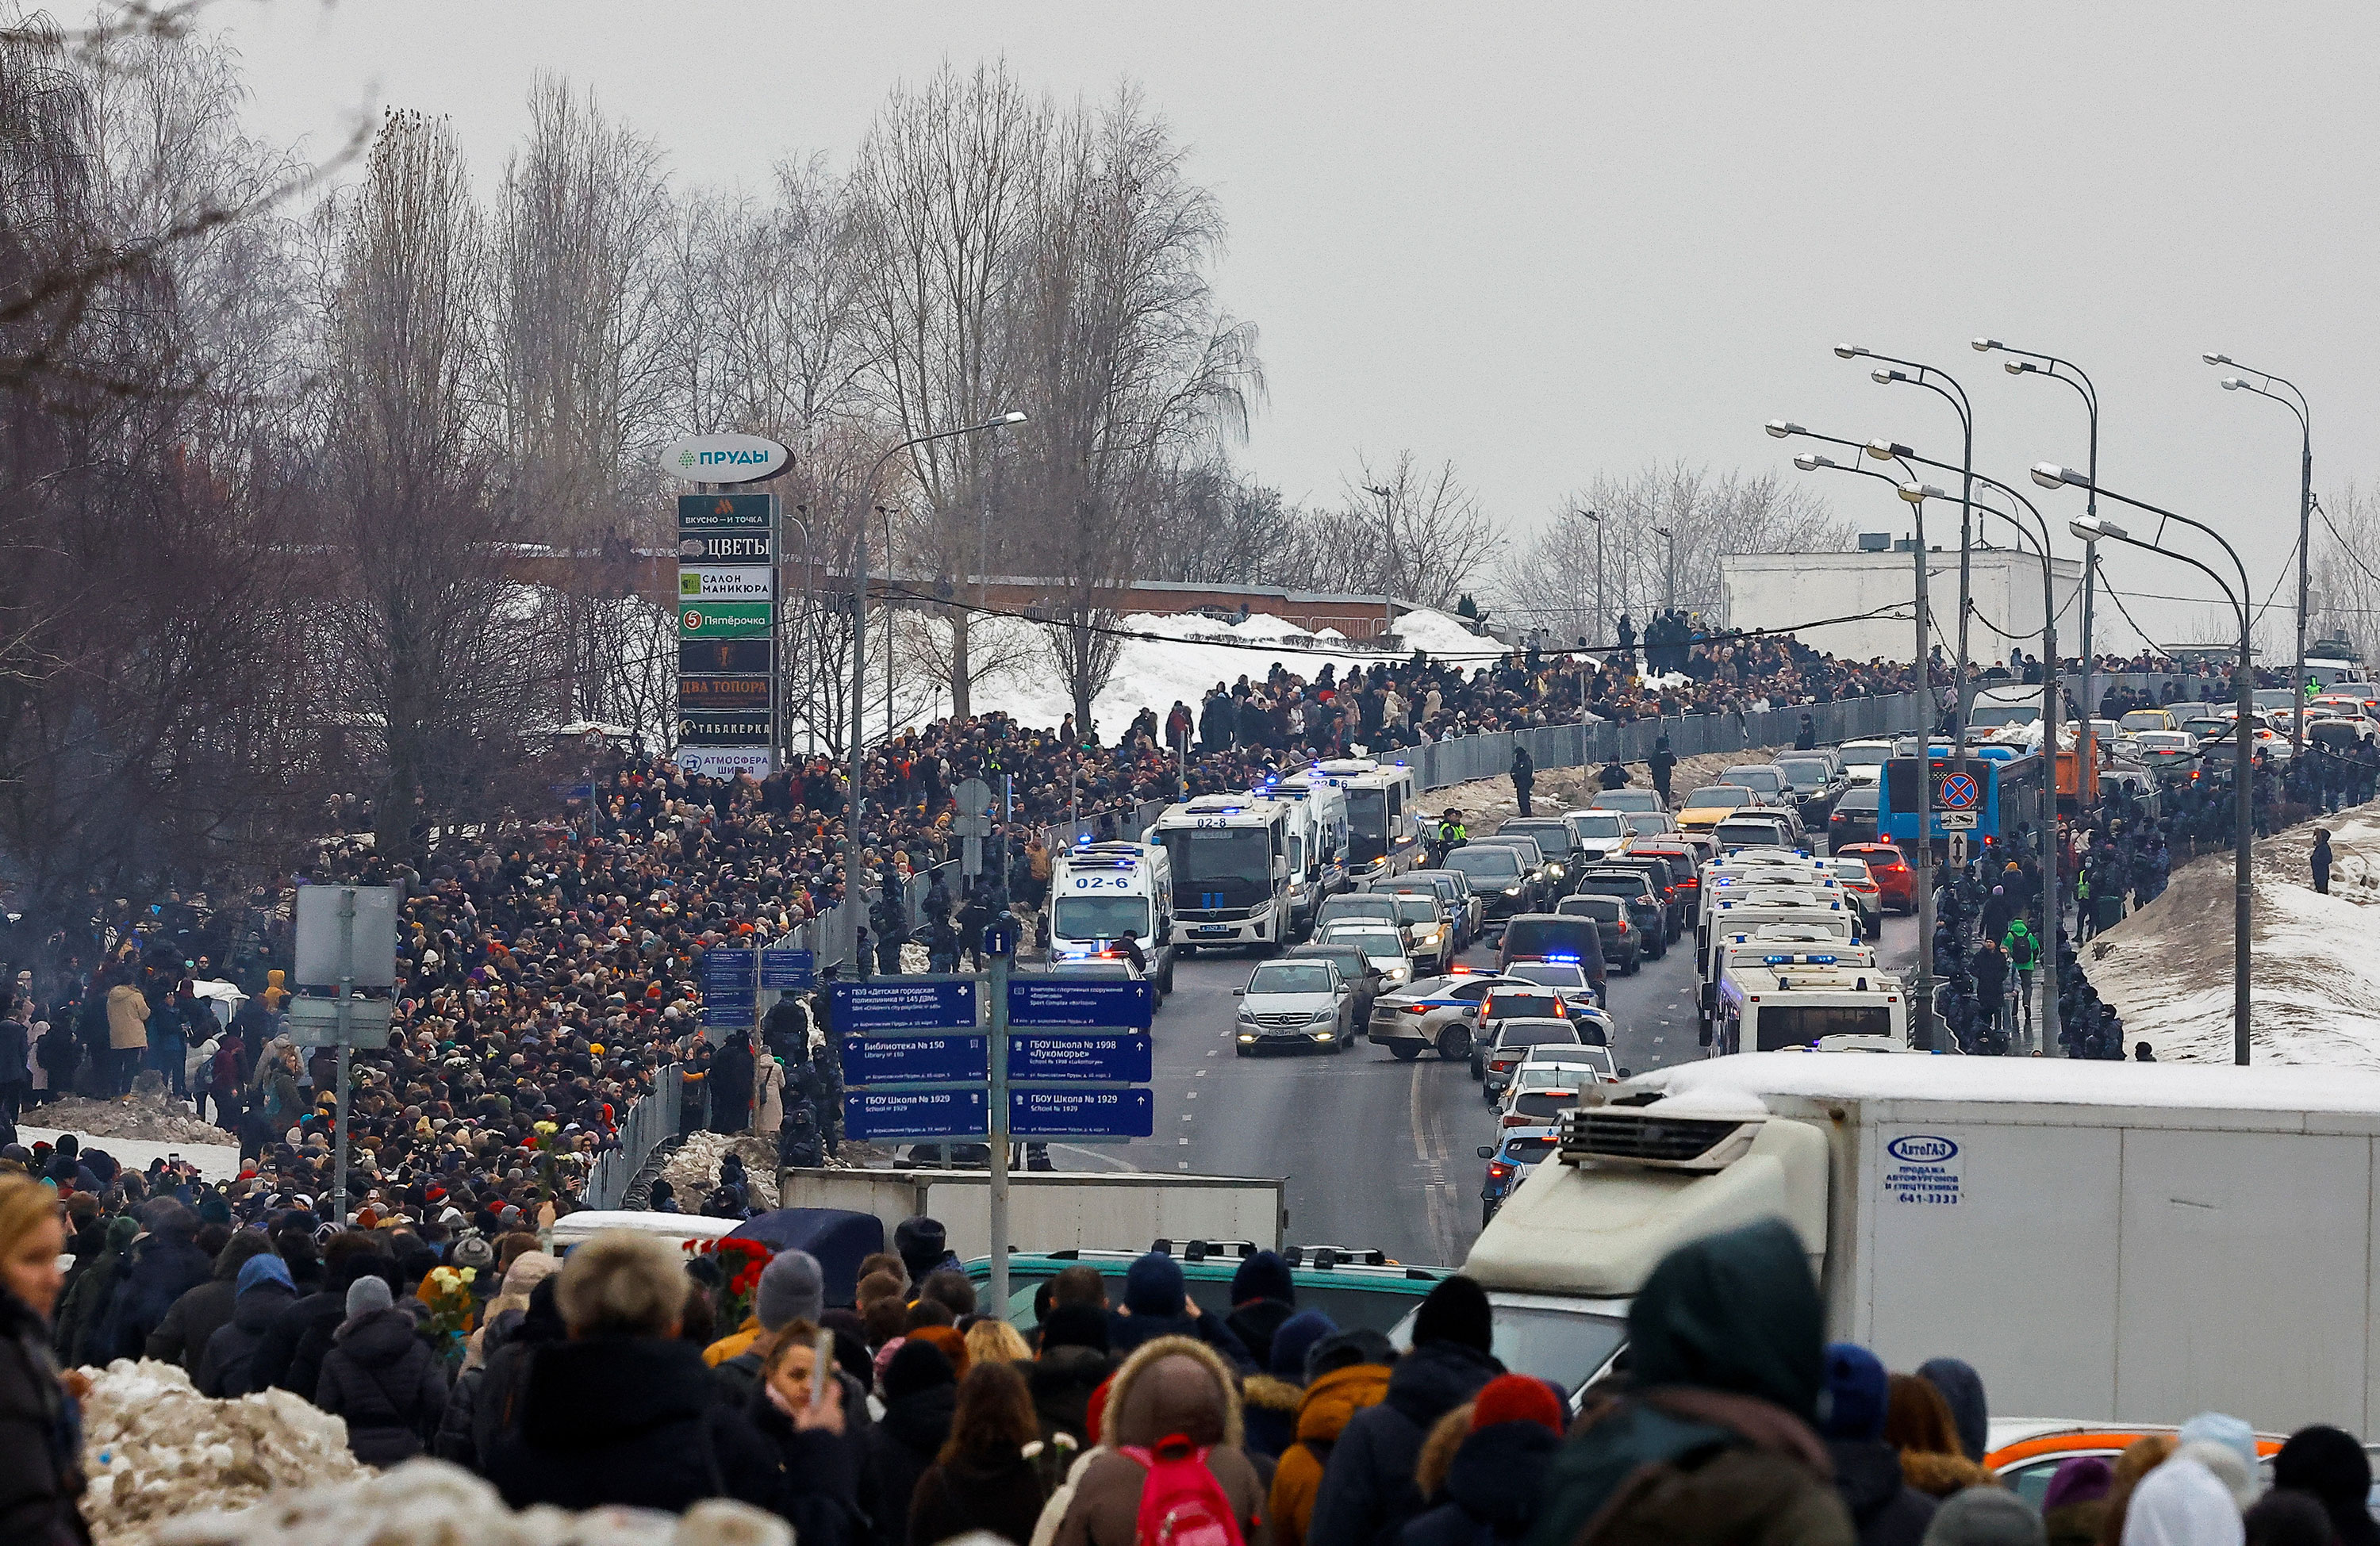 People walk towards the Borisovsky cemetery in Moscow after the funeral service.